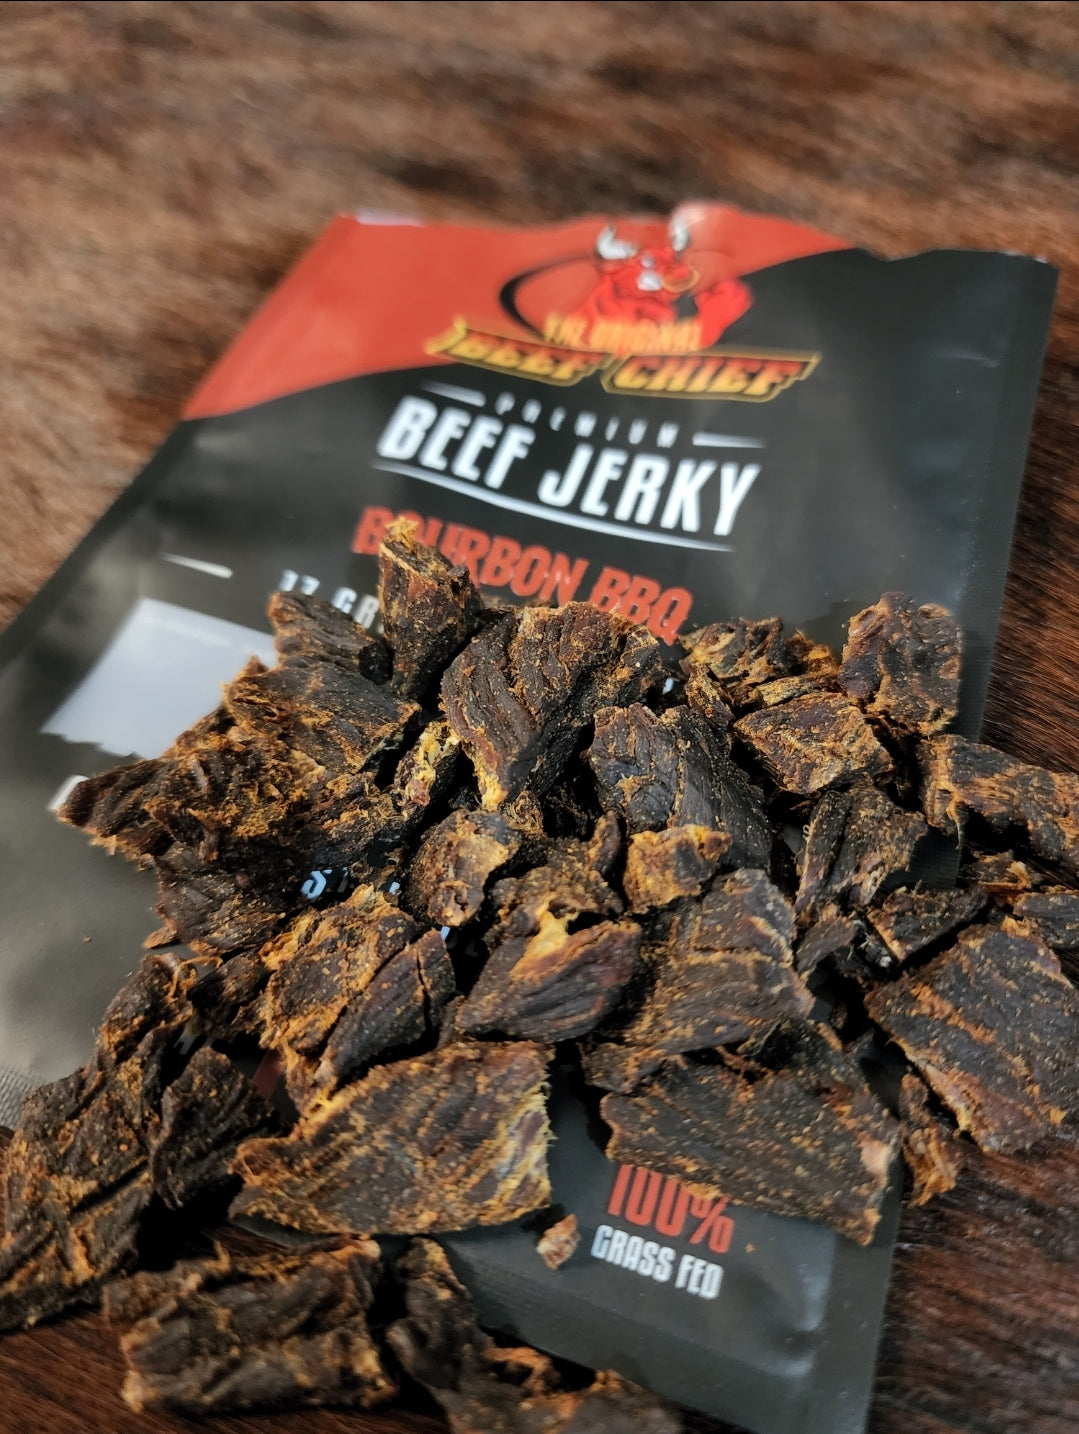 Jack Link's Beef Jerky iBotta Offer at Walmart - This Mom's Confessions